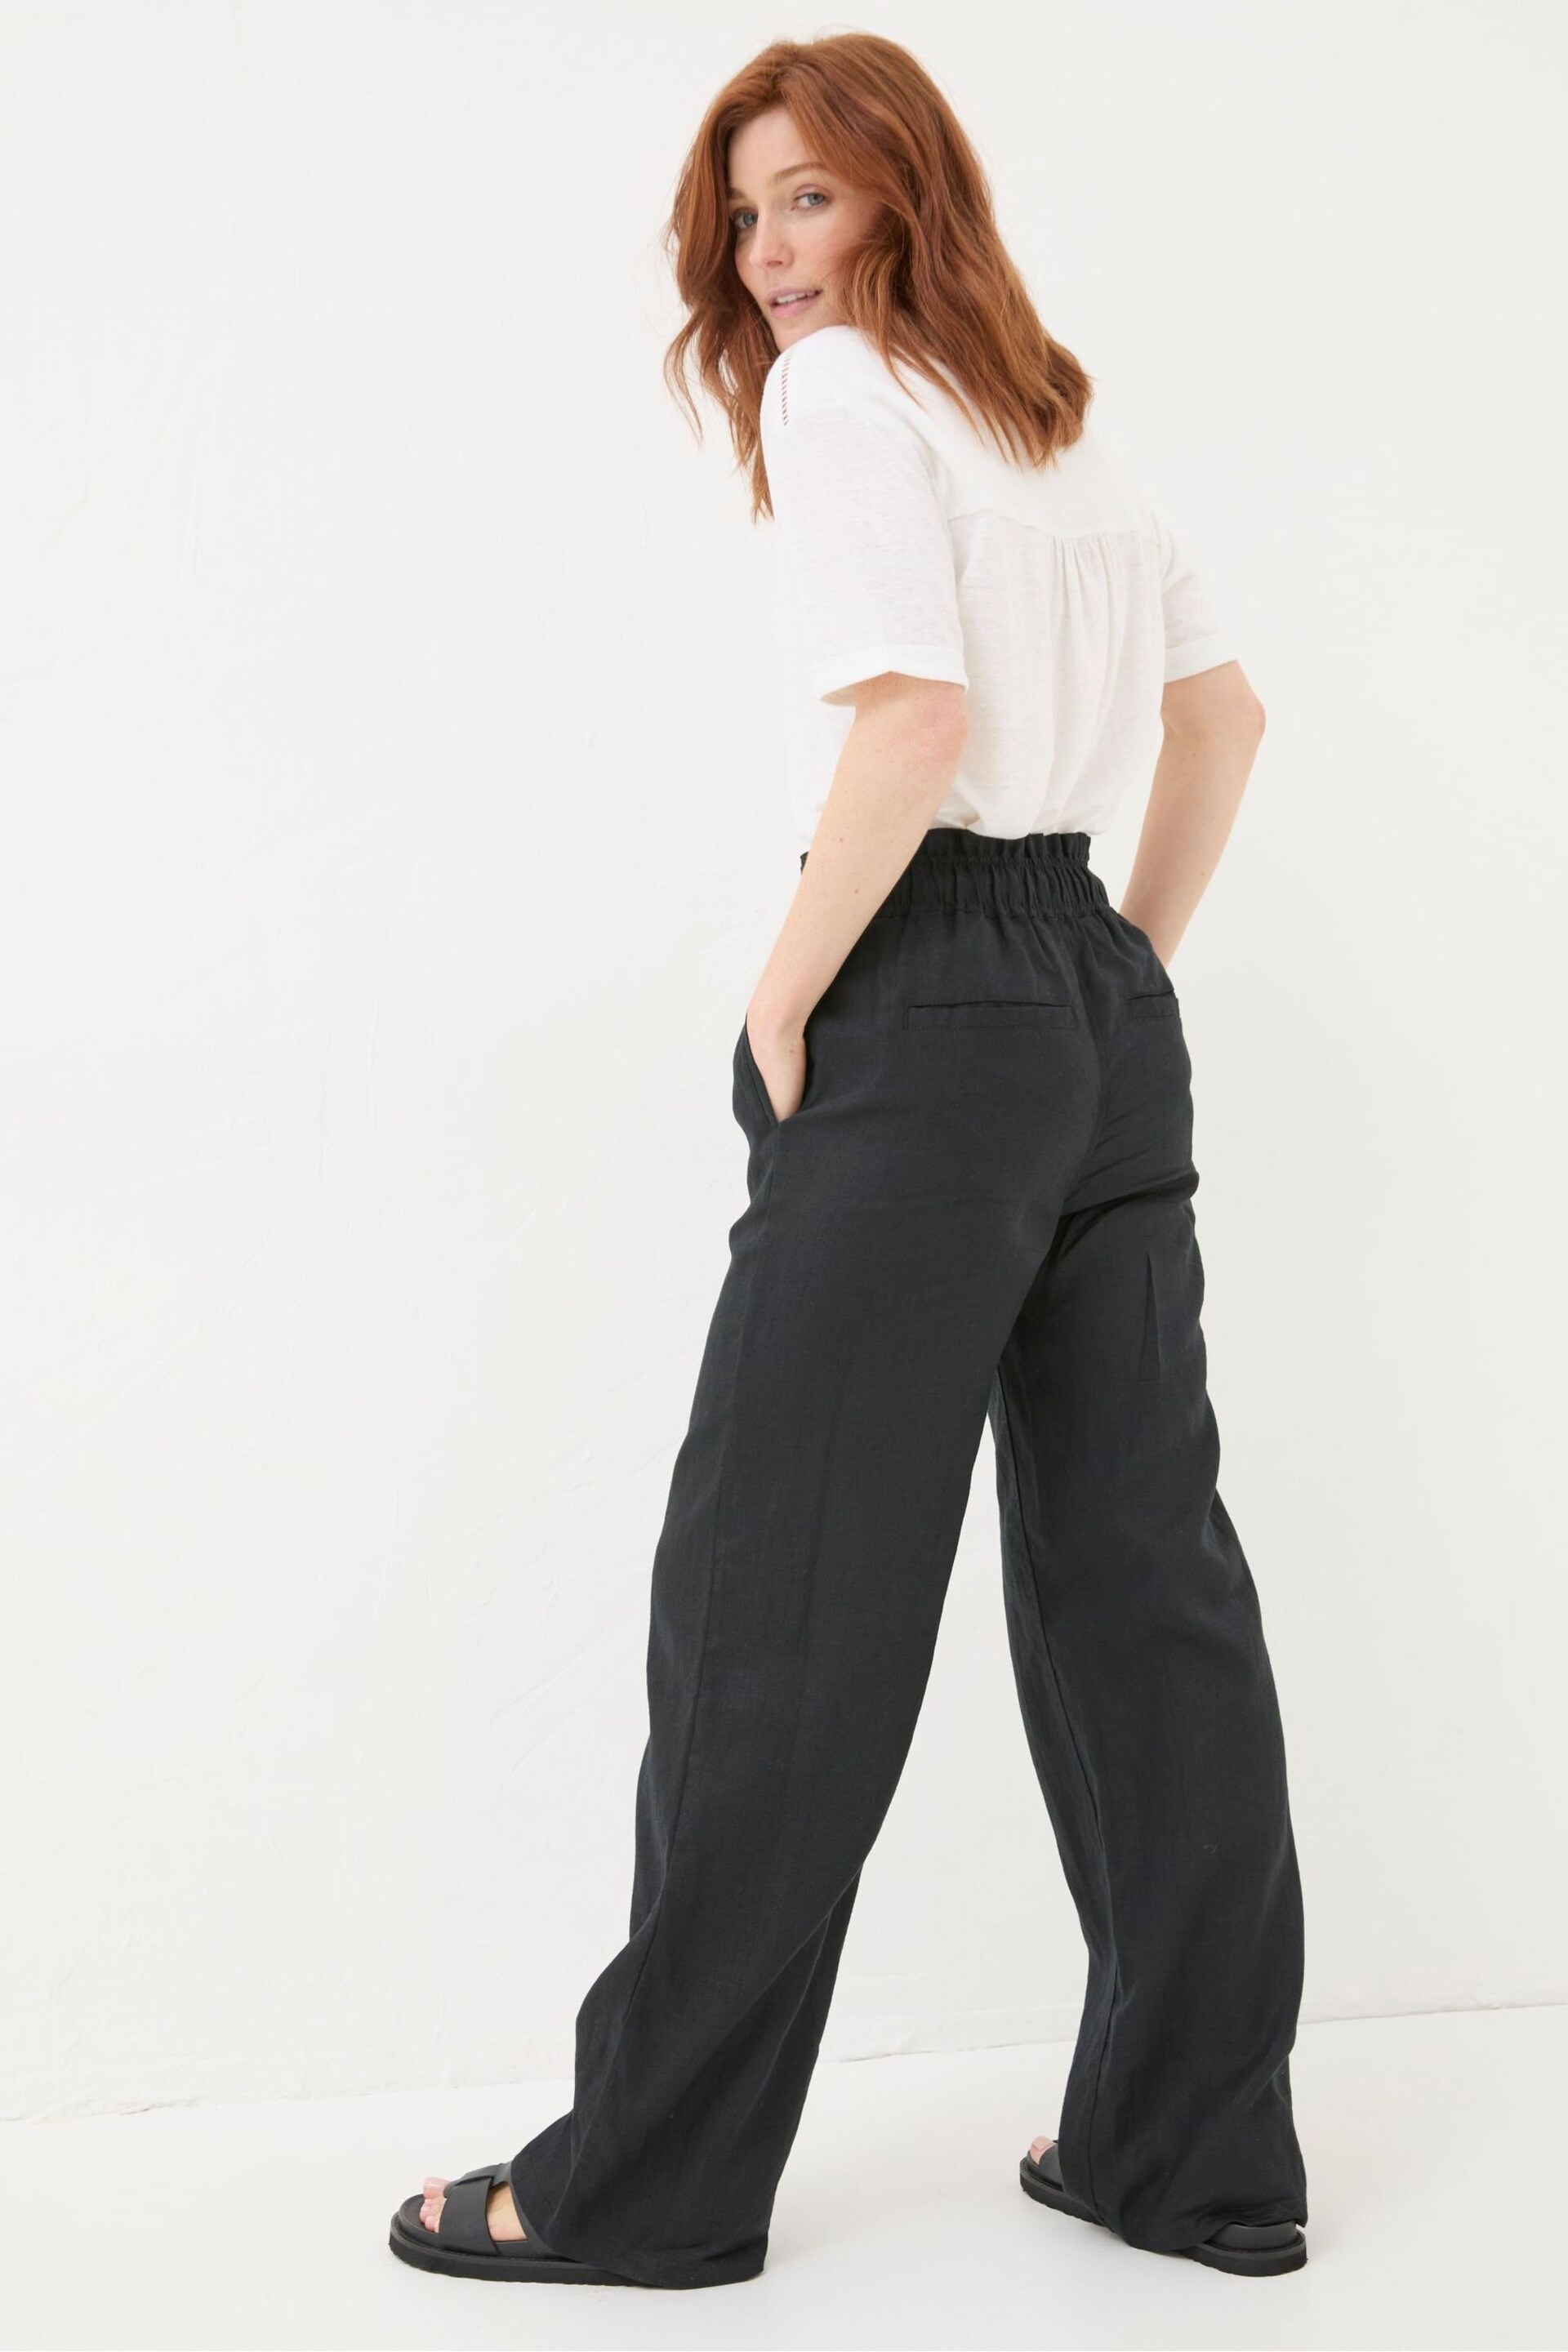 FatFace Black Iva Wide Leg Linen Trousers - Image 2 of 6